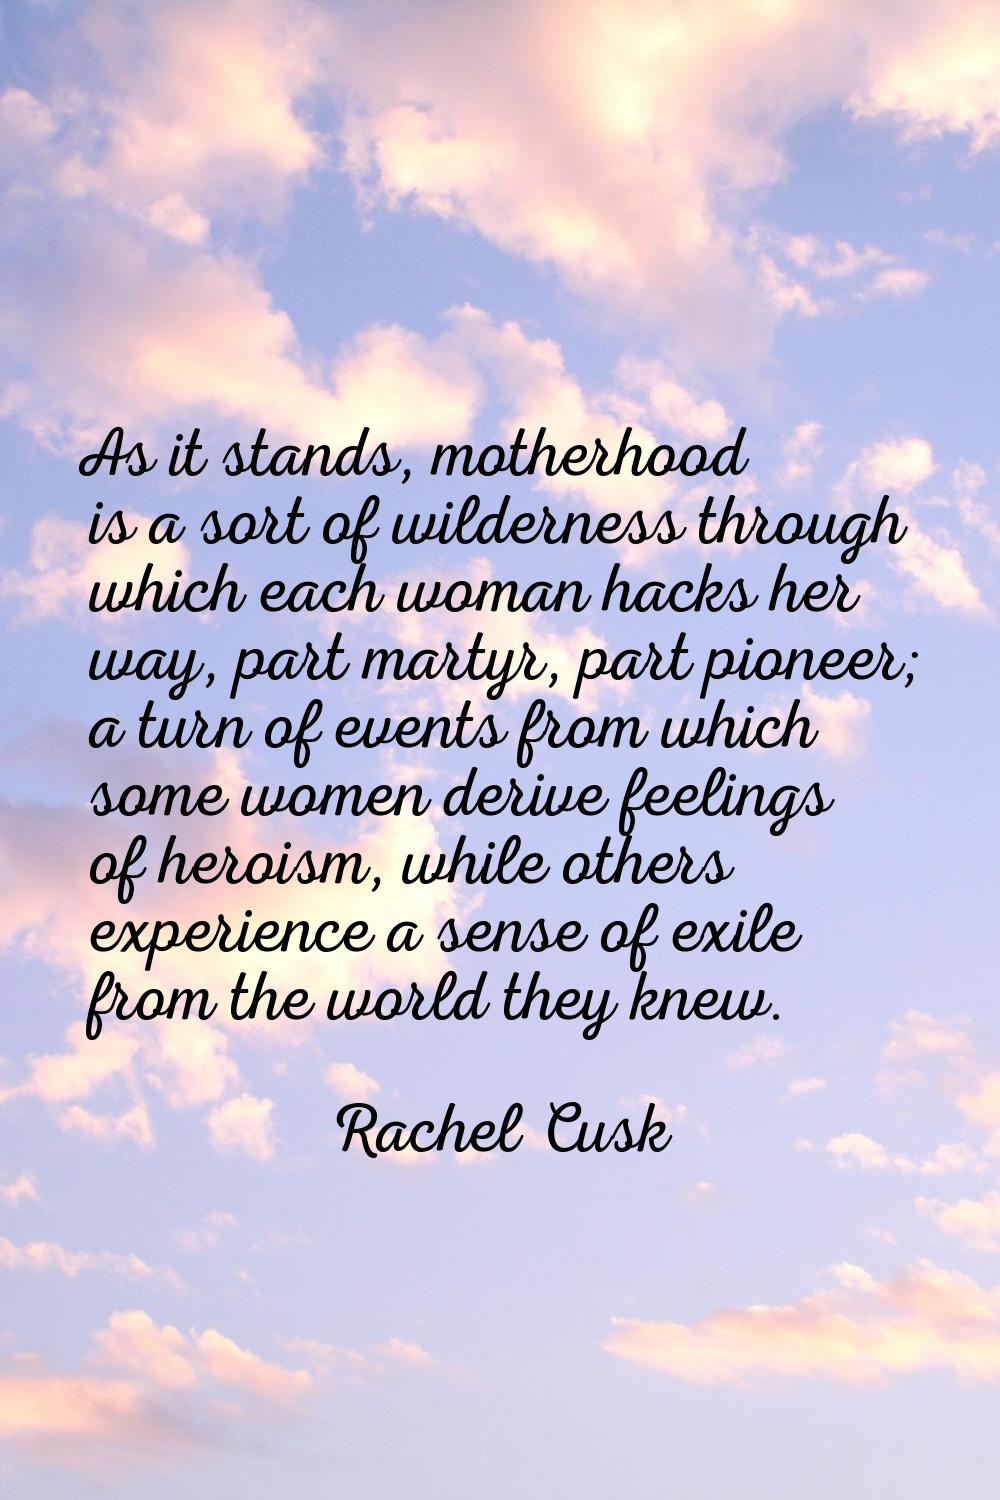 As it stands, motherhood is a sort of wilderness through which each woman hacks her way, part marty